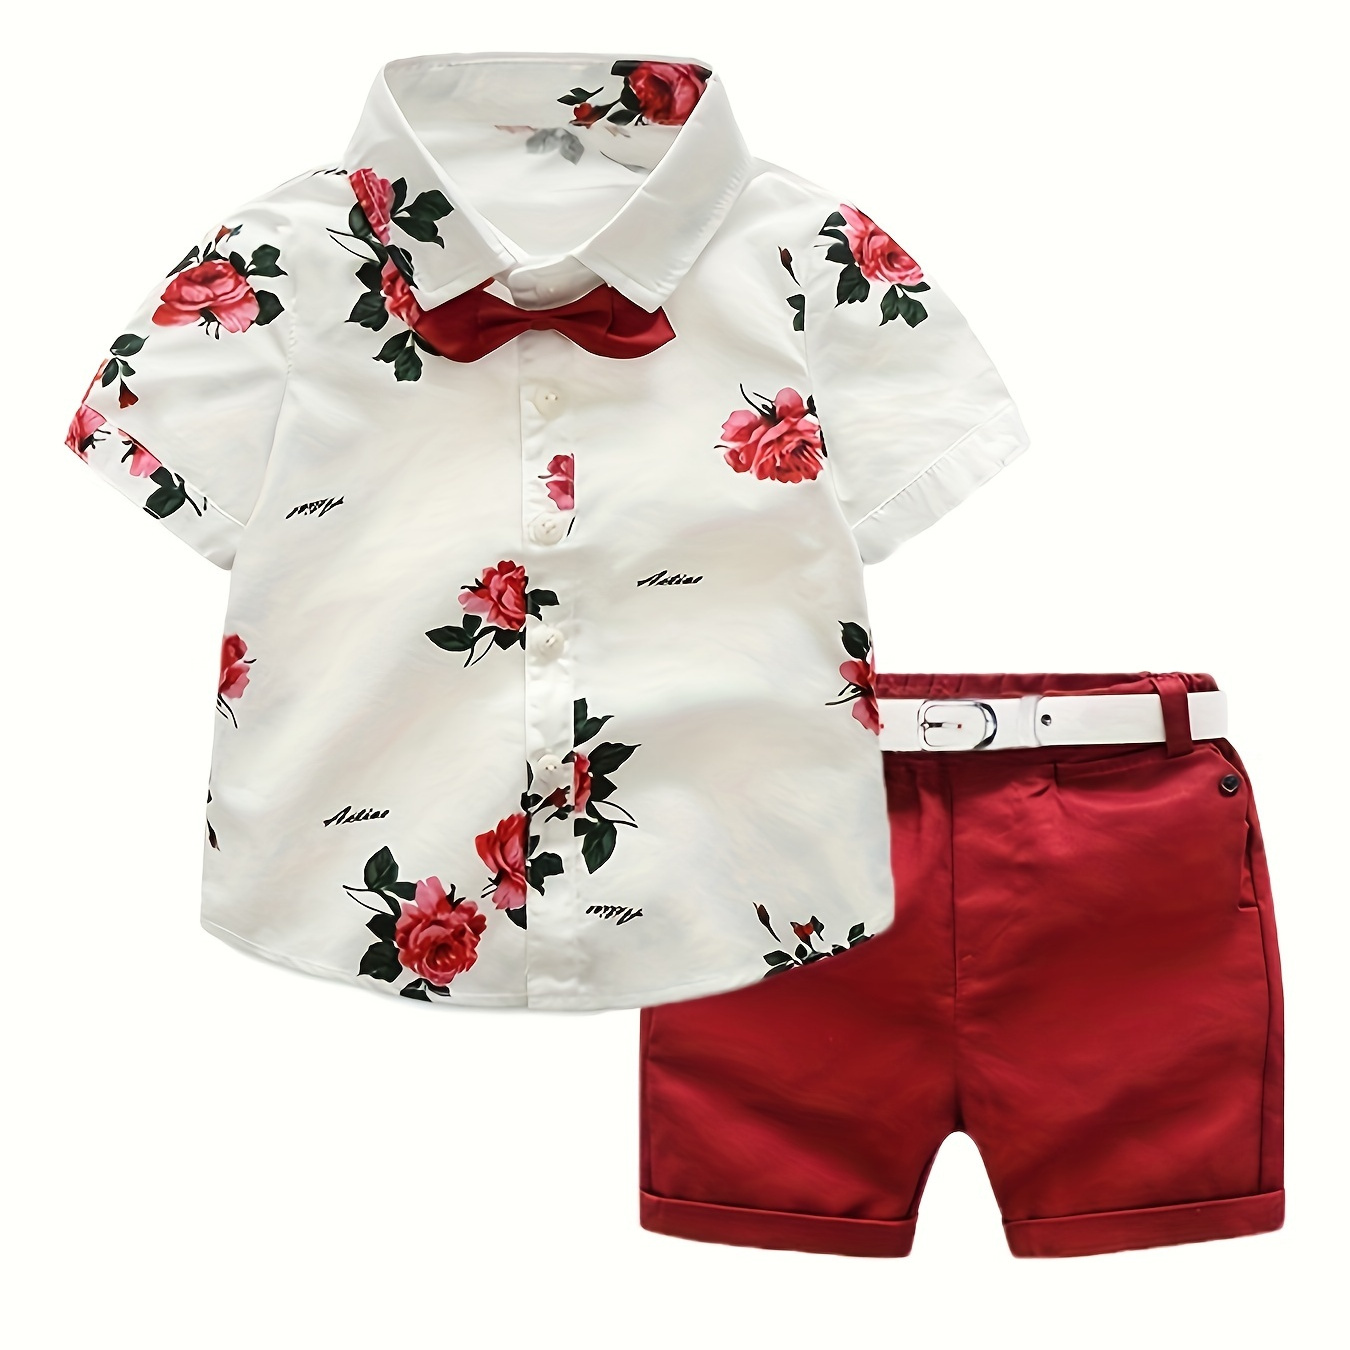 

2pcs Beach Style Boys Casual Holiday Vacation Shorts Set, Floral Bow Tie Short Sleeve Shirt + Belt Elastic Waist Shorts, Kids Gentleman Formal Outfit